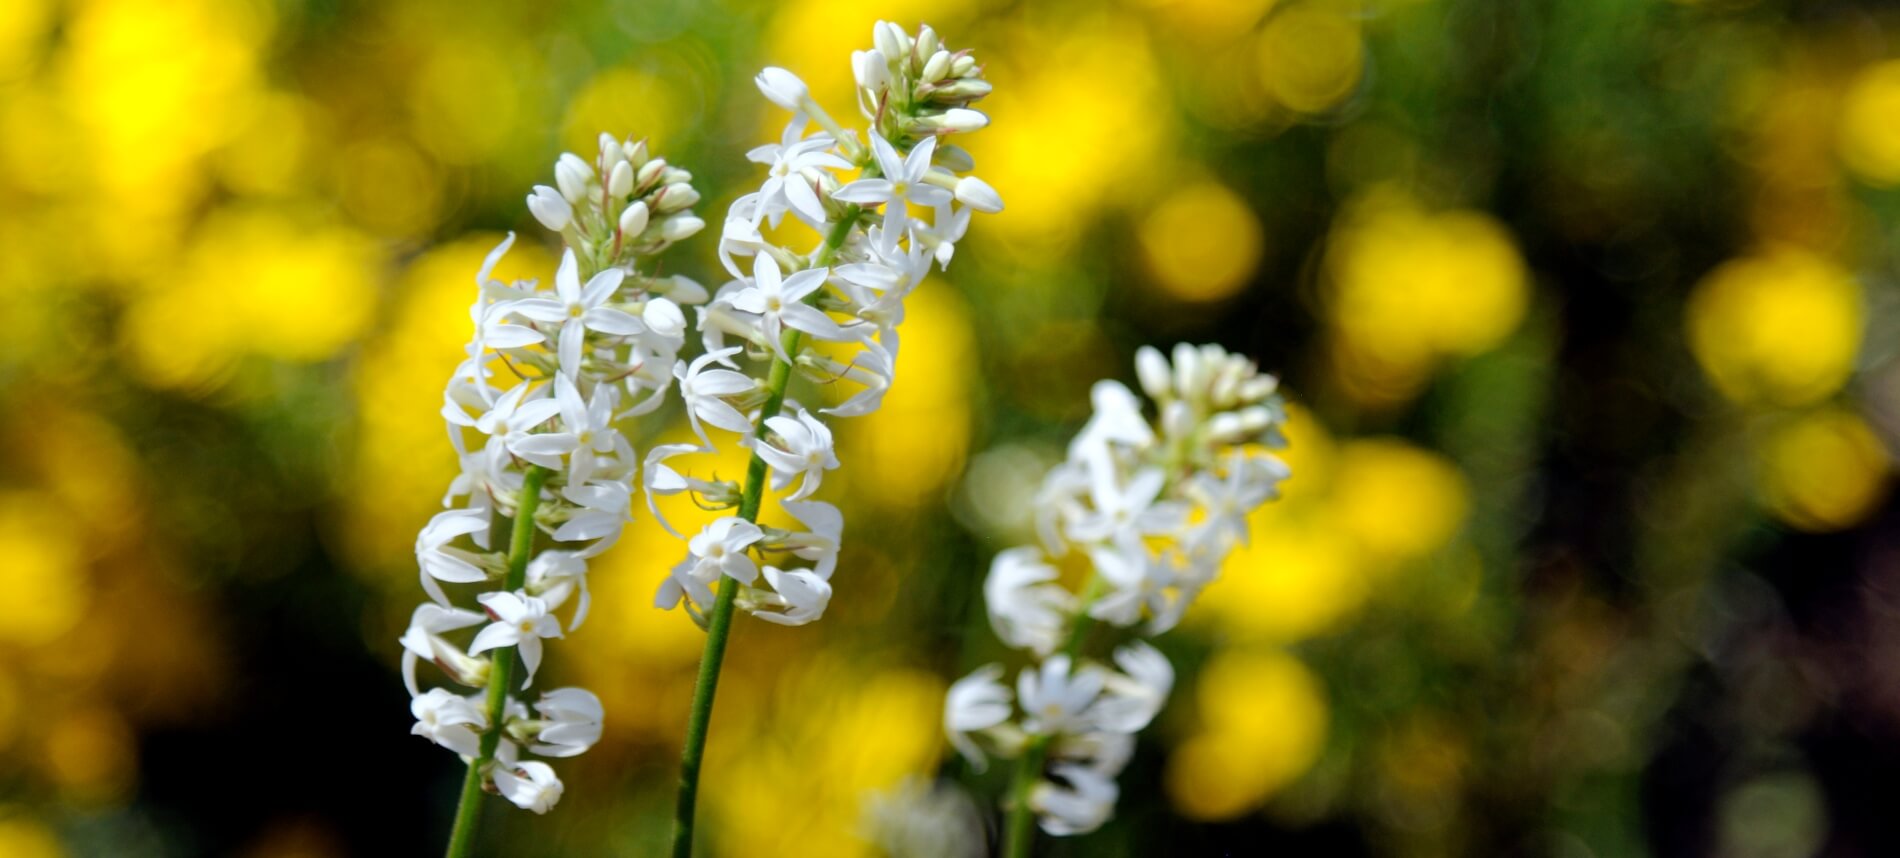 View of blossoming white flowers with blurred yellow blooms in background